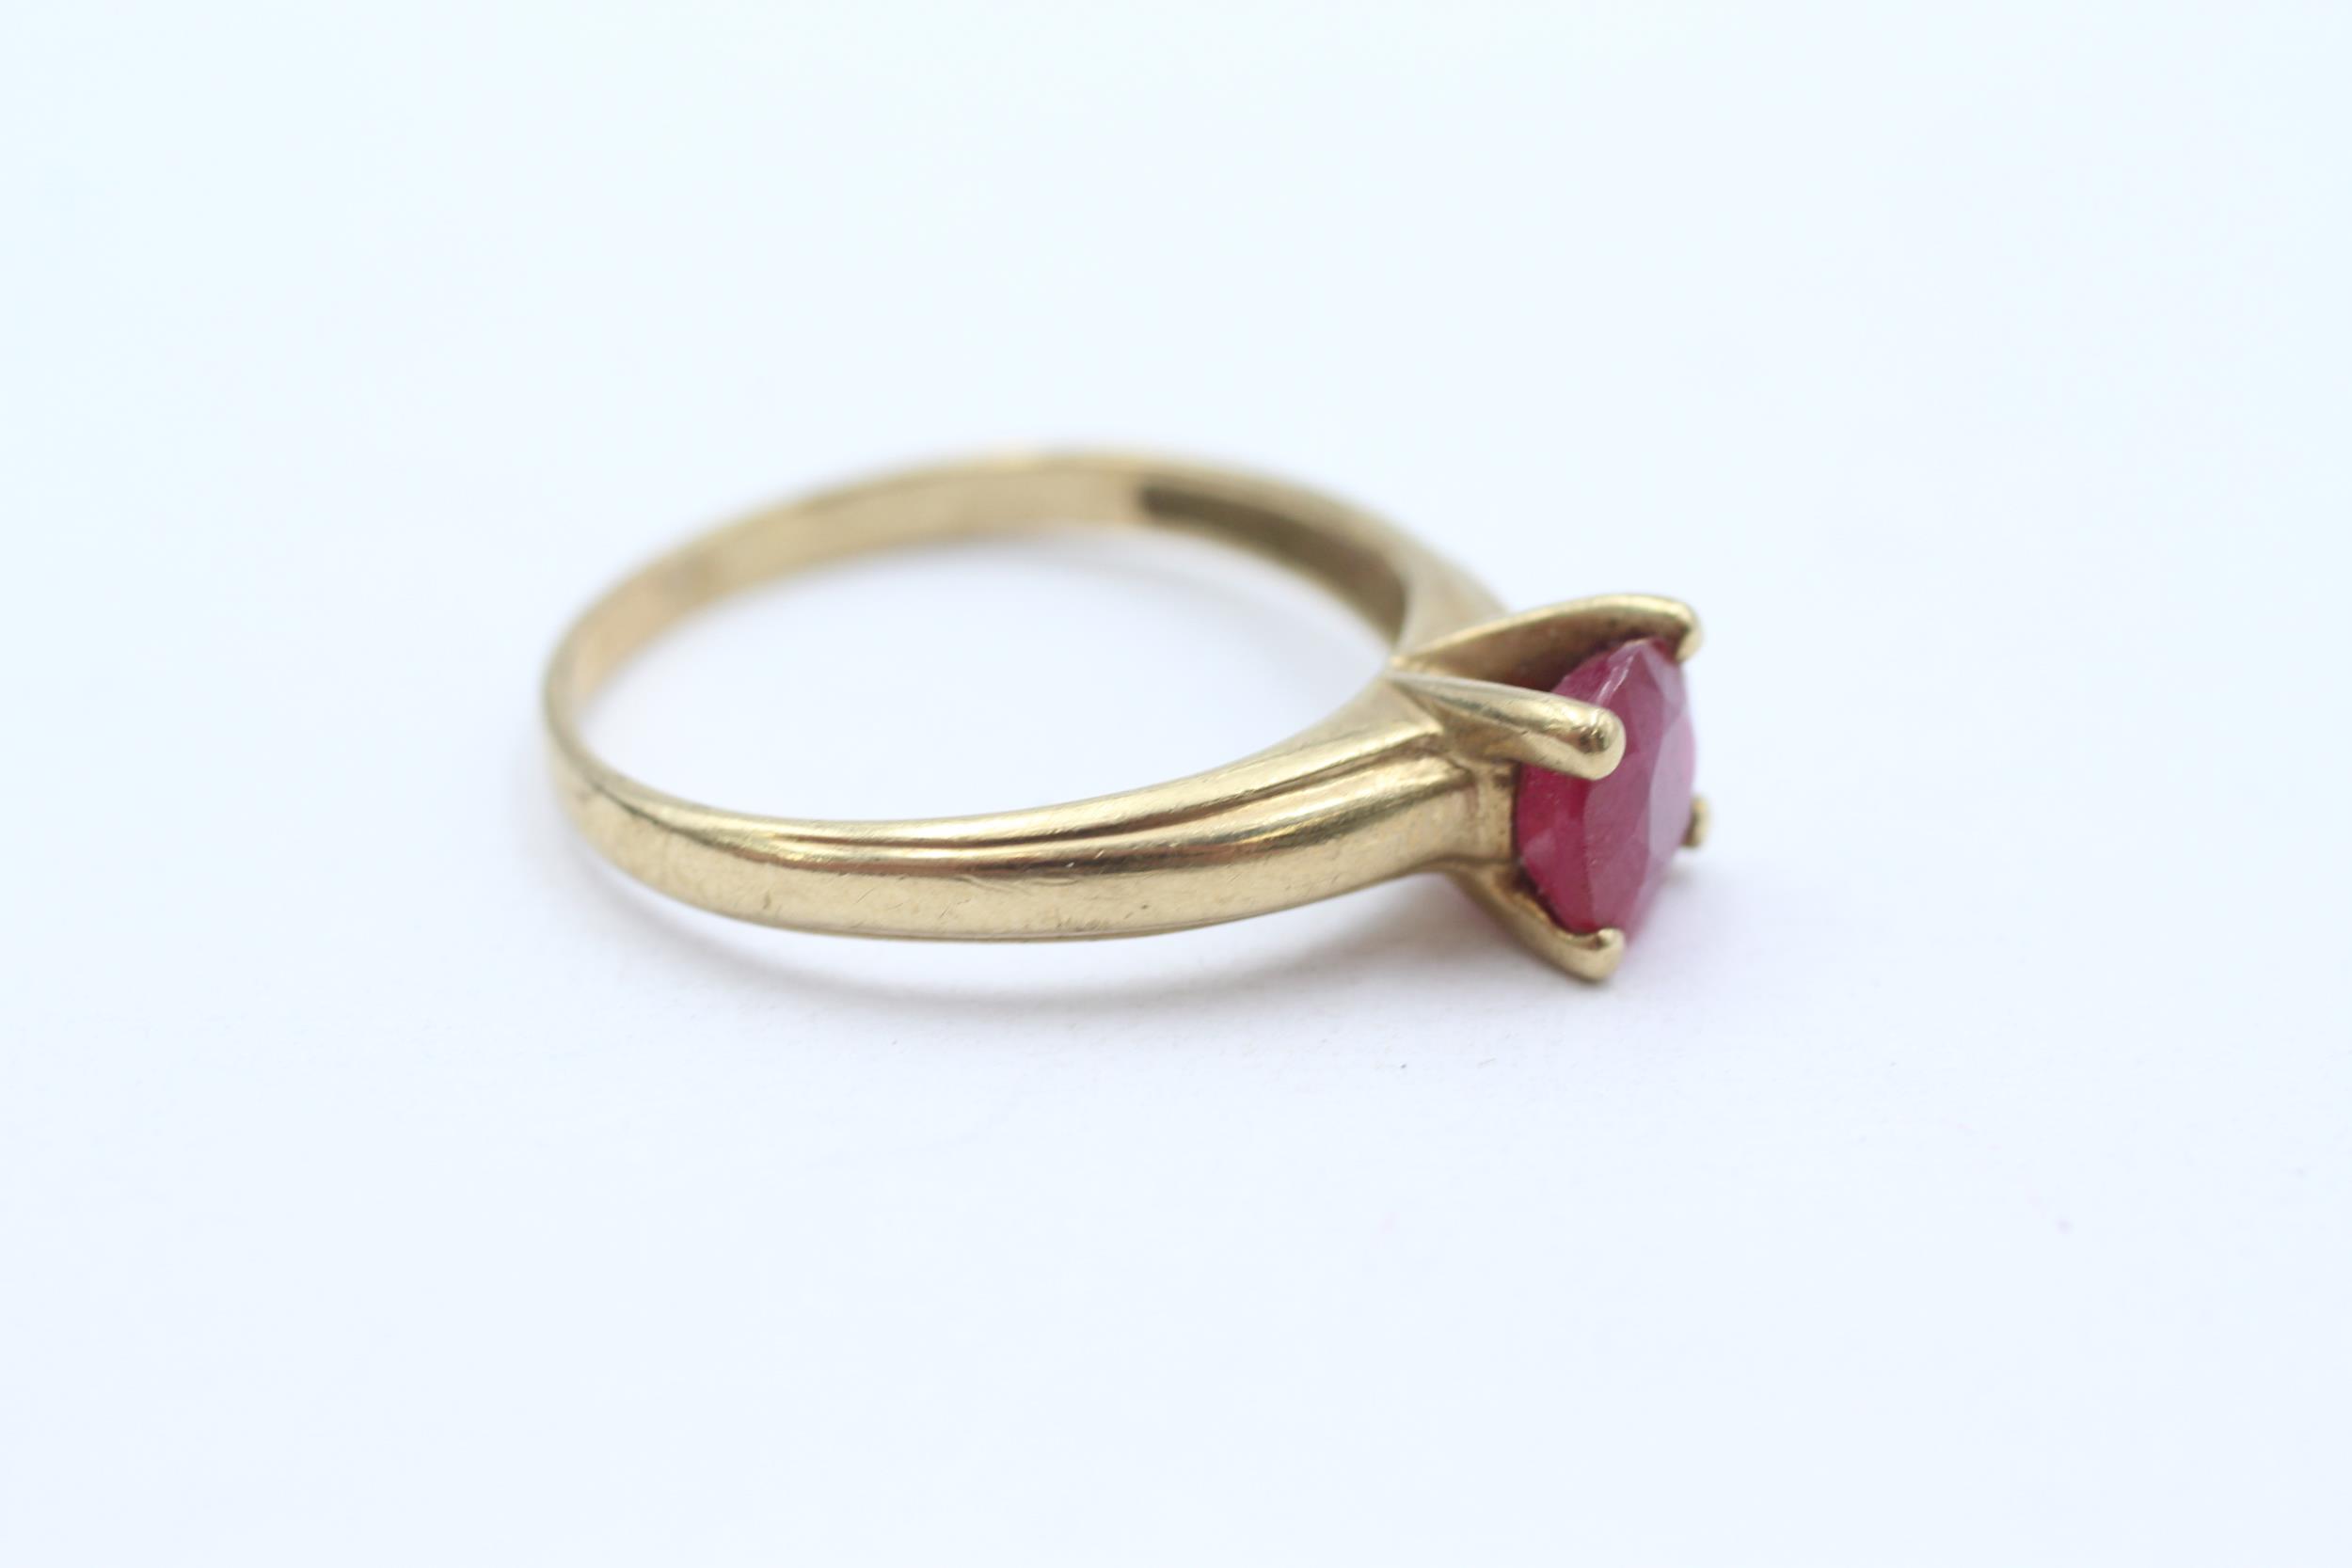 9ct gold enhanced ruby solitaire ring, claw set Size S - 2.9 g - Image 2 of 4